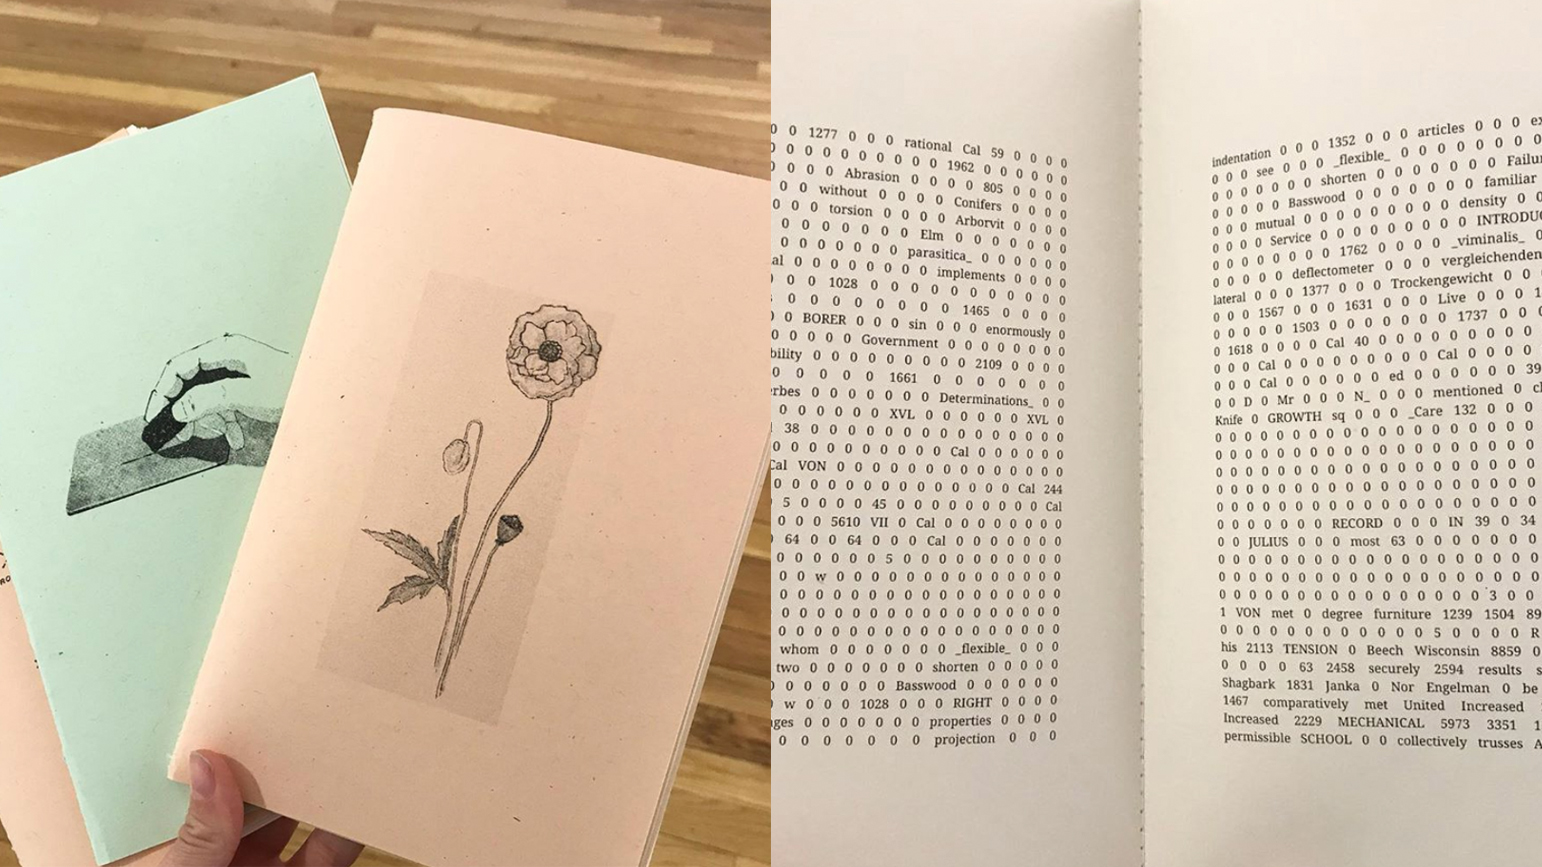 Two images of zines, one showing the cover, and the other showing the text inside